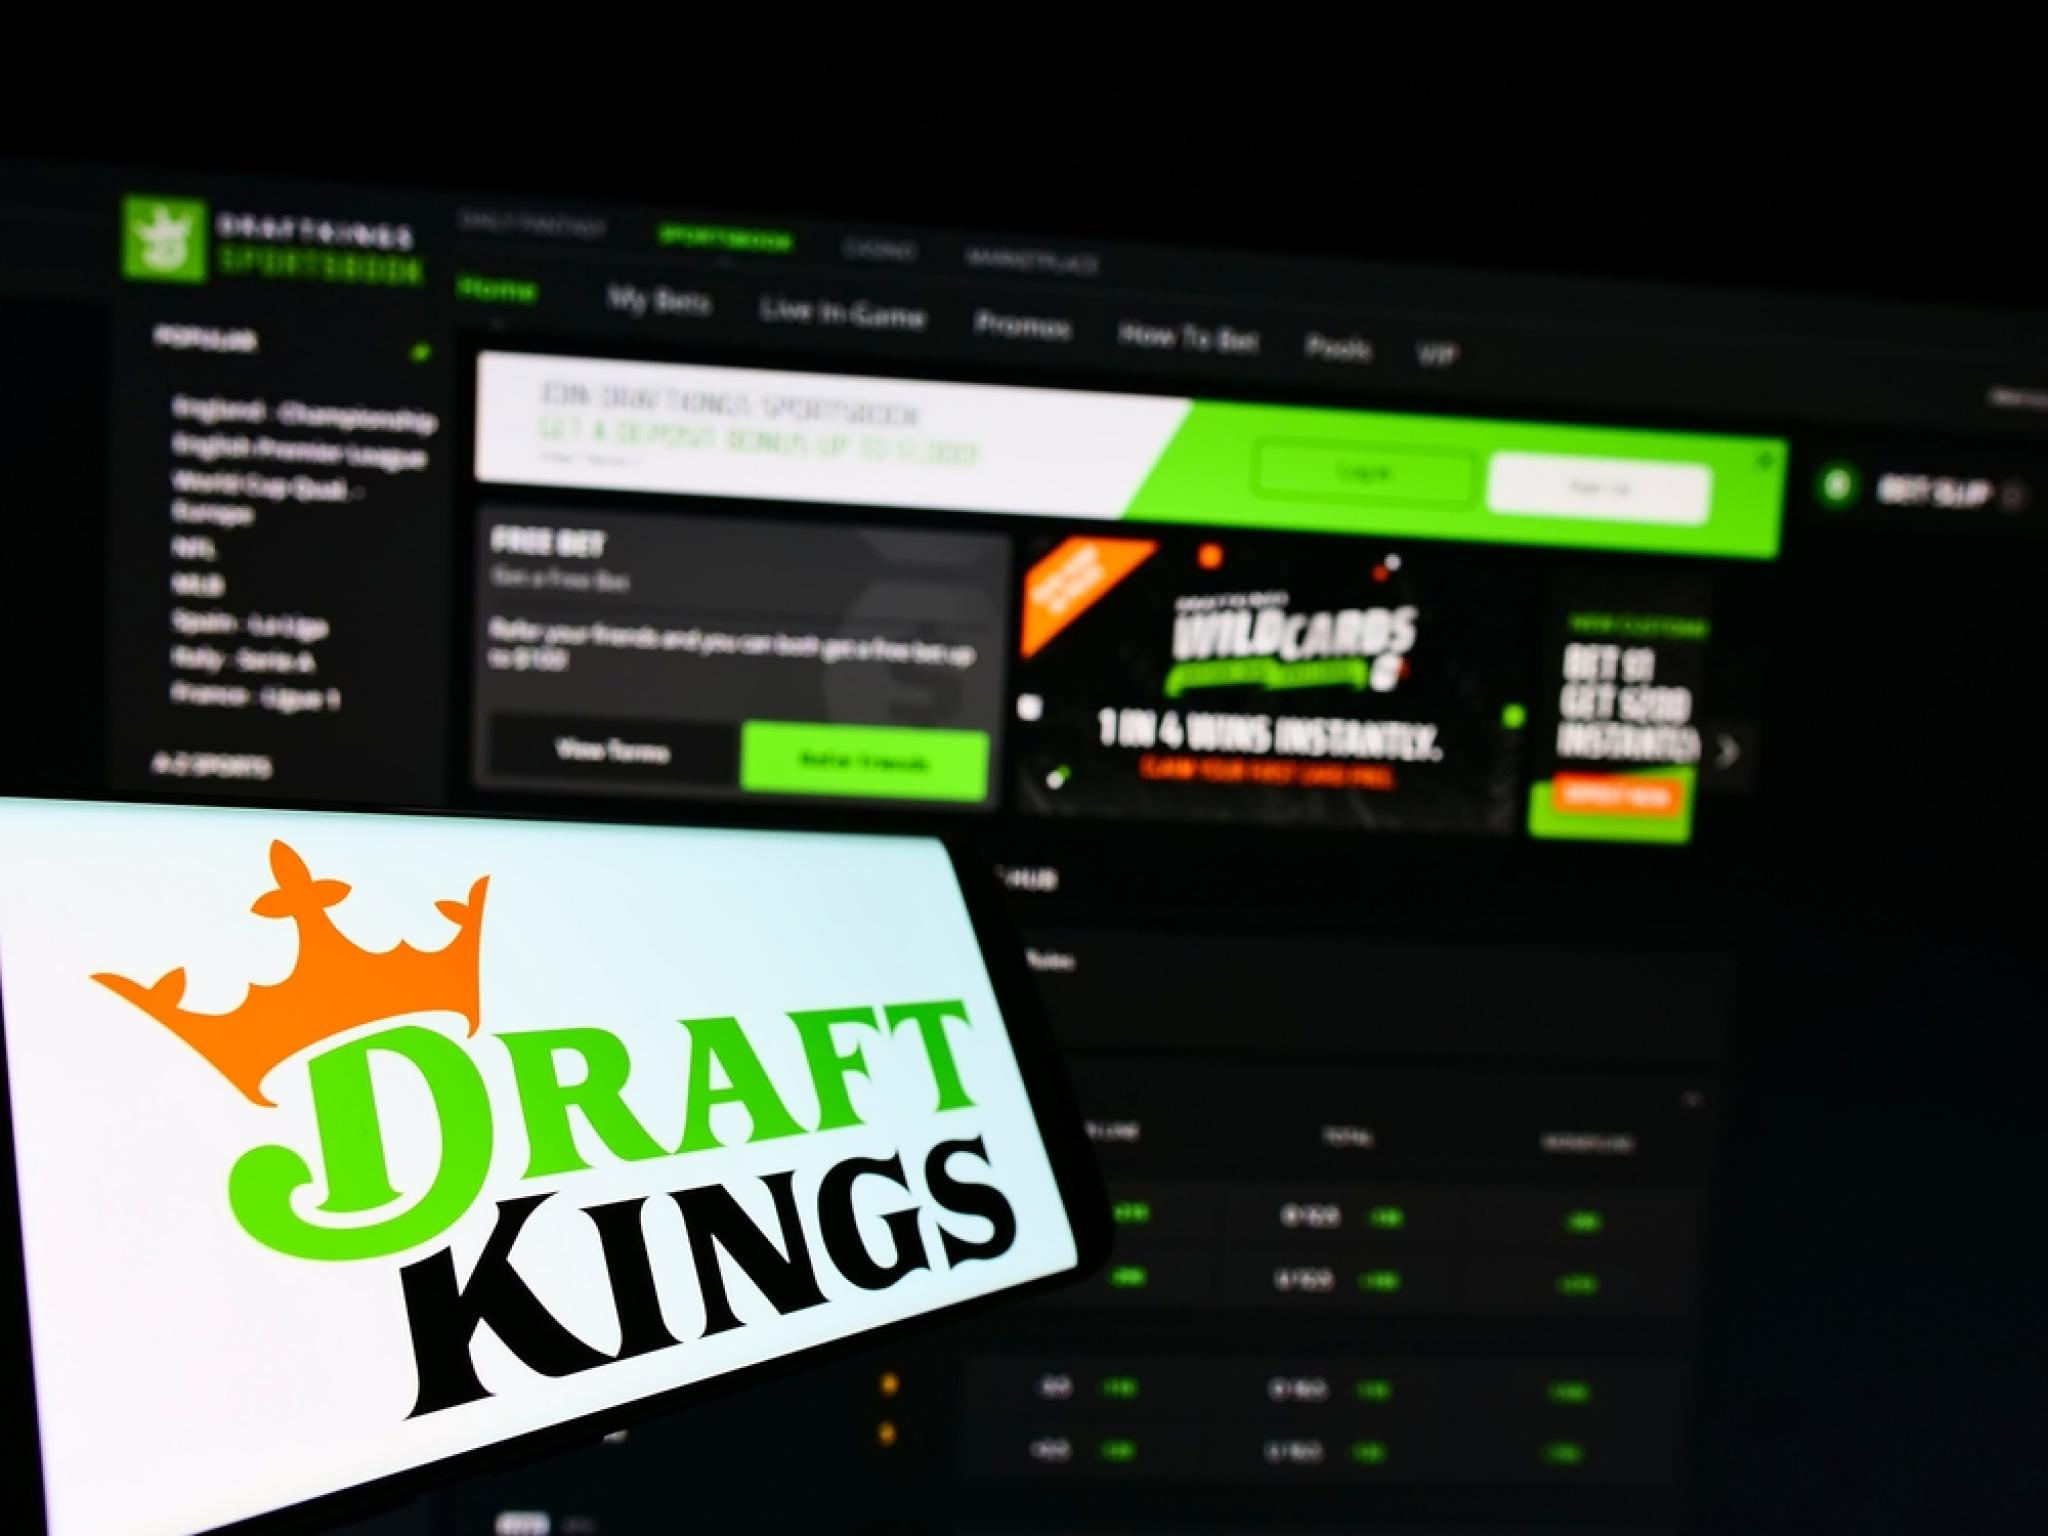  draftkings-stock-can-overcome-wall-of-worry-around-various-regulatory-risks-analyst-says-sizing-up-illinois-taxes-jackpocket-acquisition 